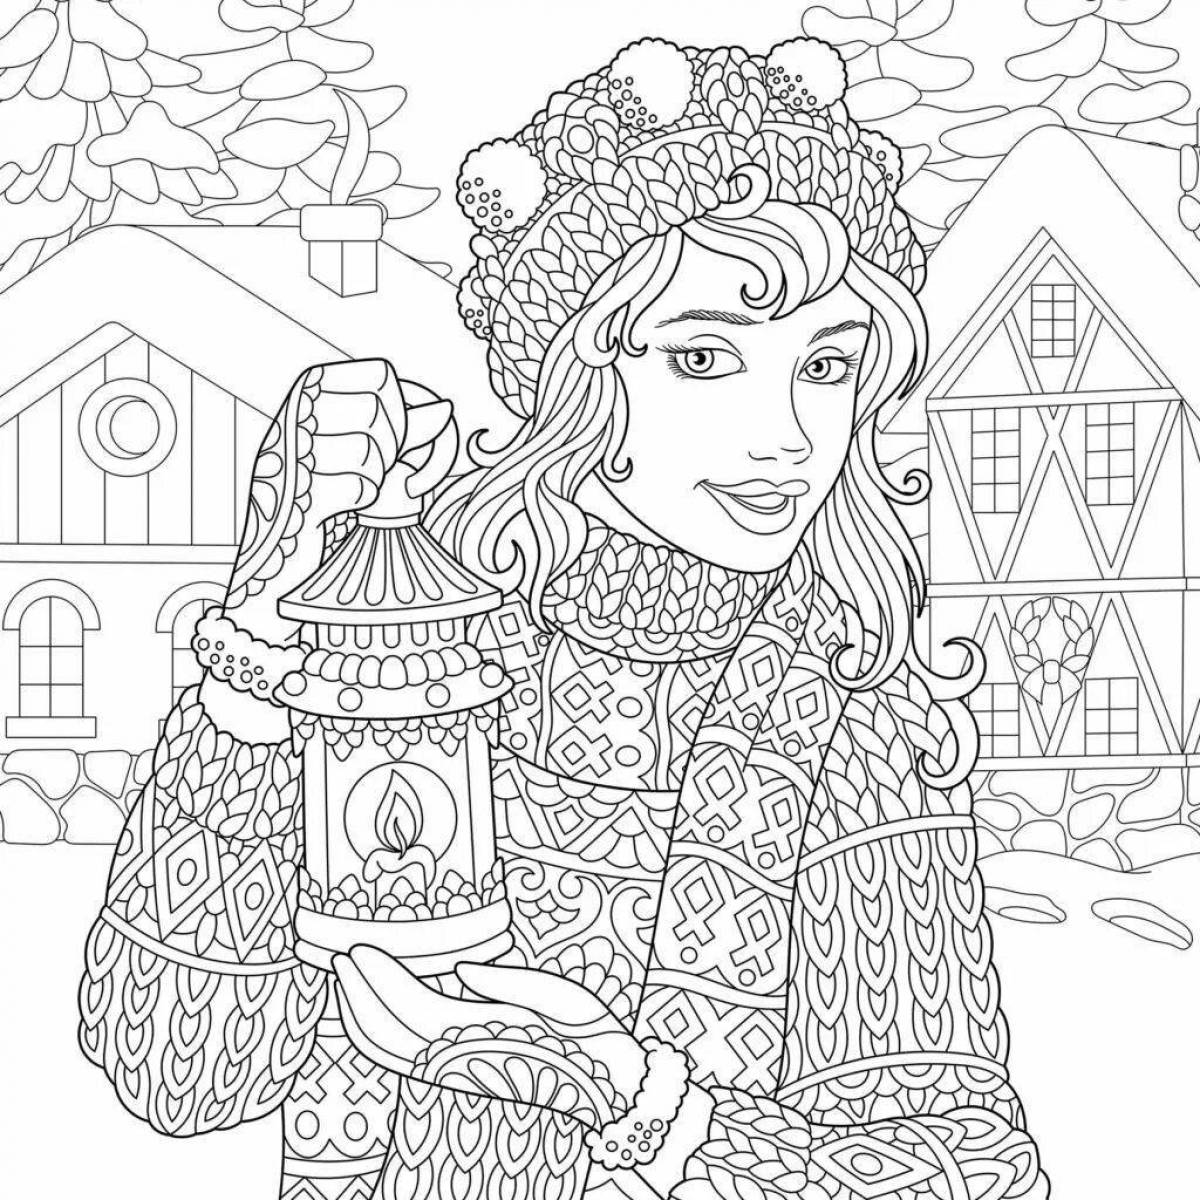 Great winter coloring book for adults